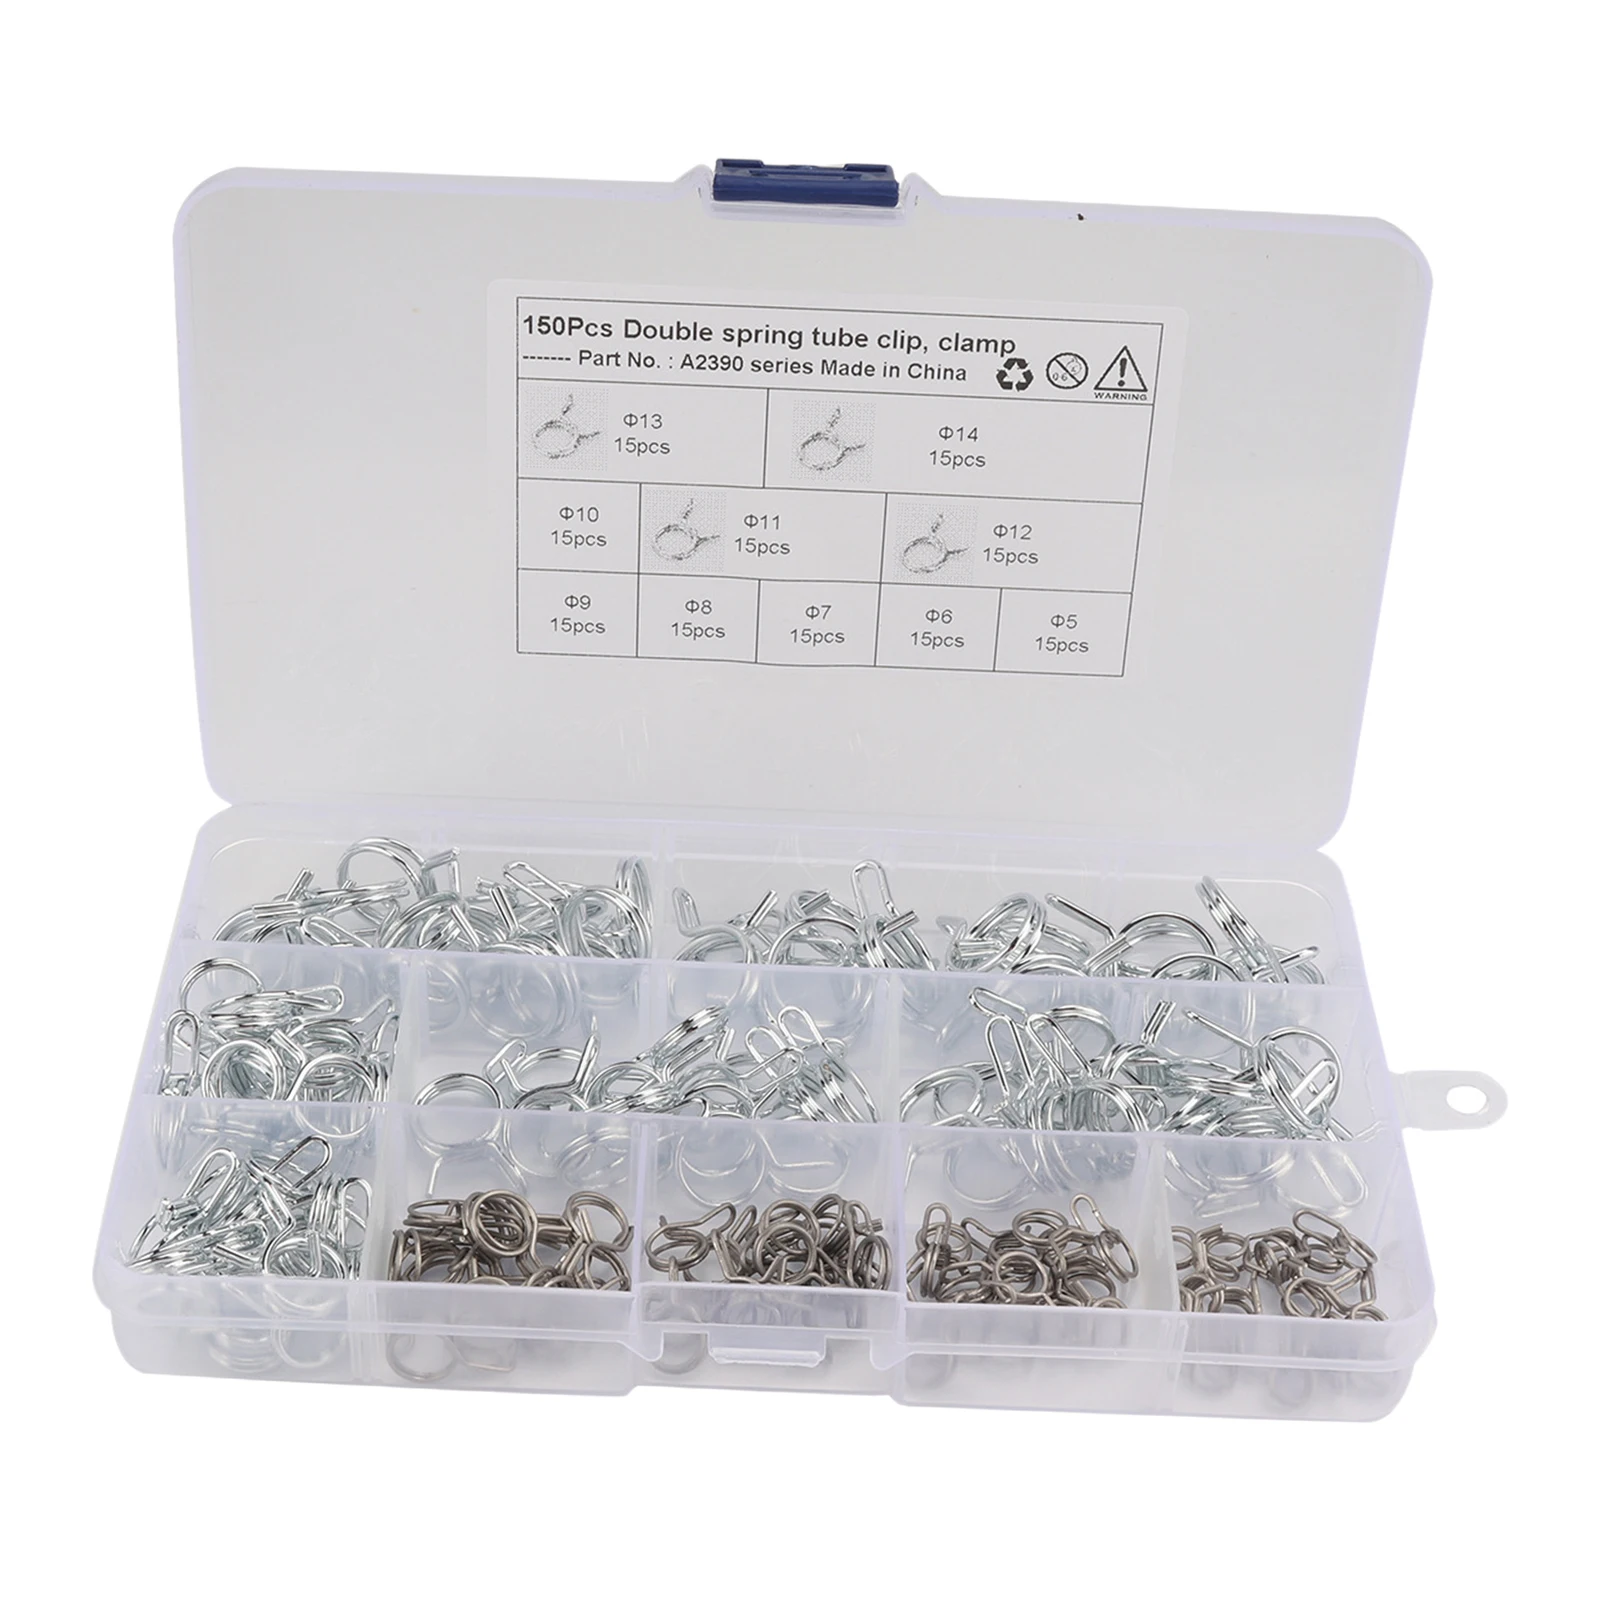 150pcs 5-14mm Water Pipe Air Tubing Spring Clips Assortment Kit, Zinc Plated, Packed in A Plastic Box